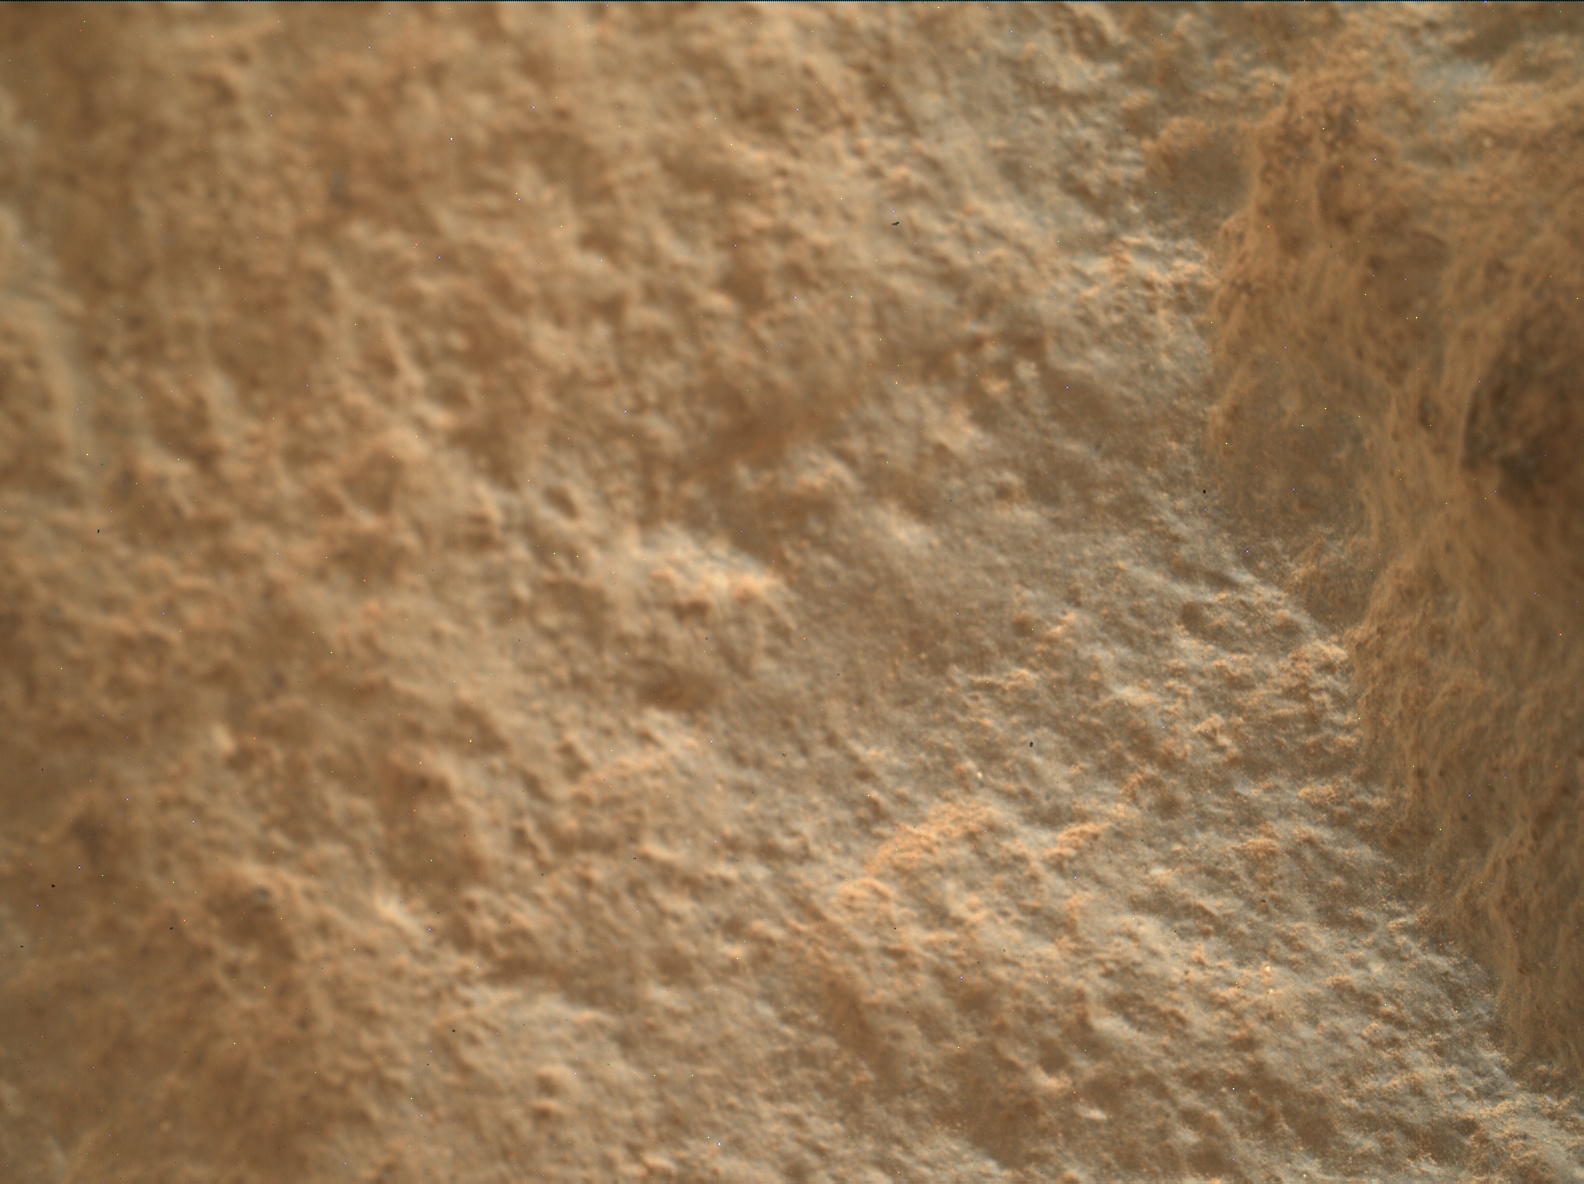 Nasa's Mars rover Curiosity acquired this image using its Mars Hand Lens Imager (MAHLI) on Sol 3439